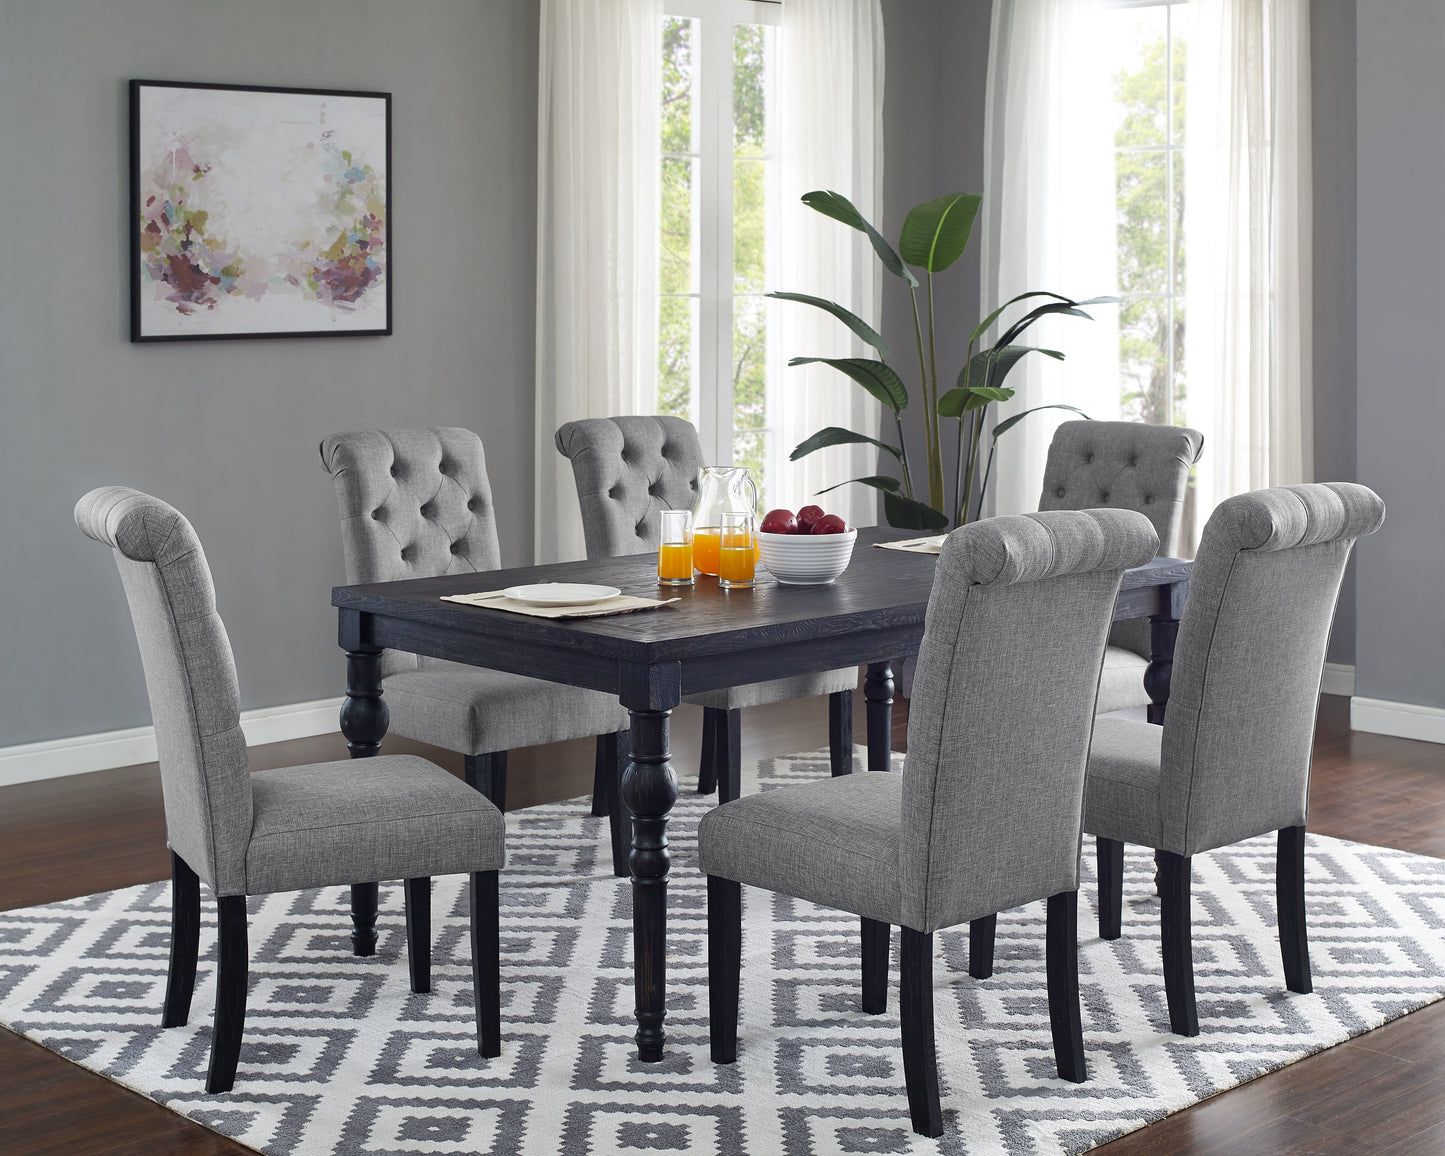 Leviton Urban Style Wood Dark Wash Turned-Leg Dining Set: Table and 6 Chairs, Gray